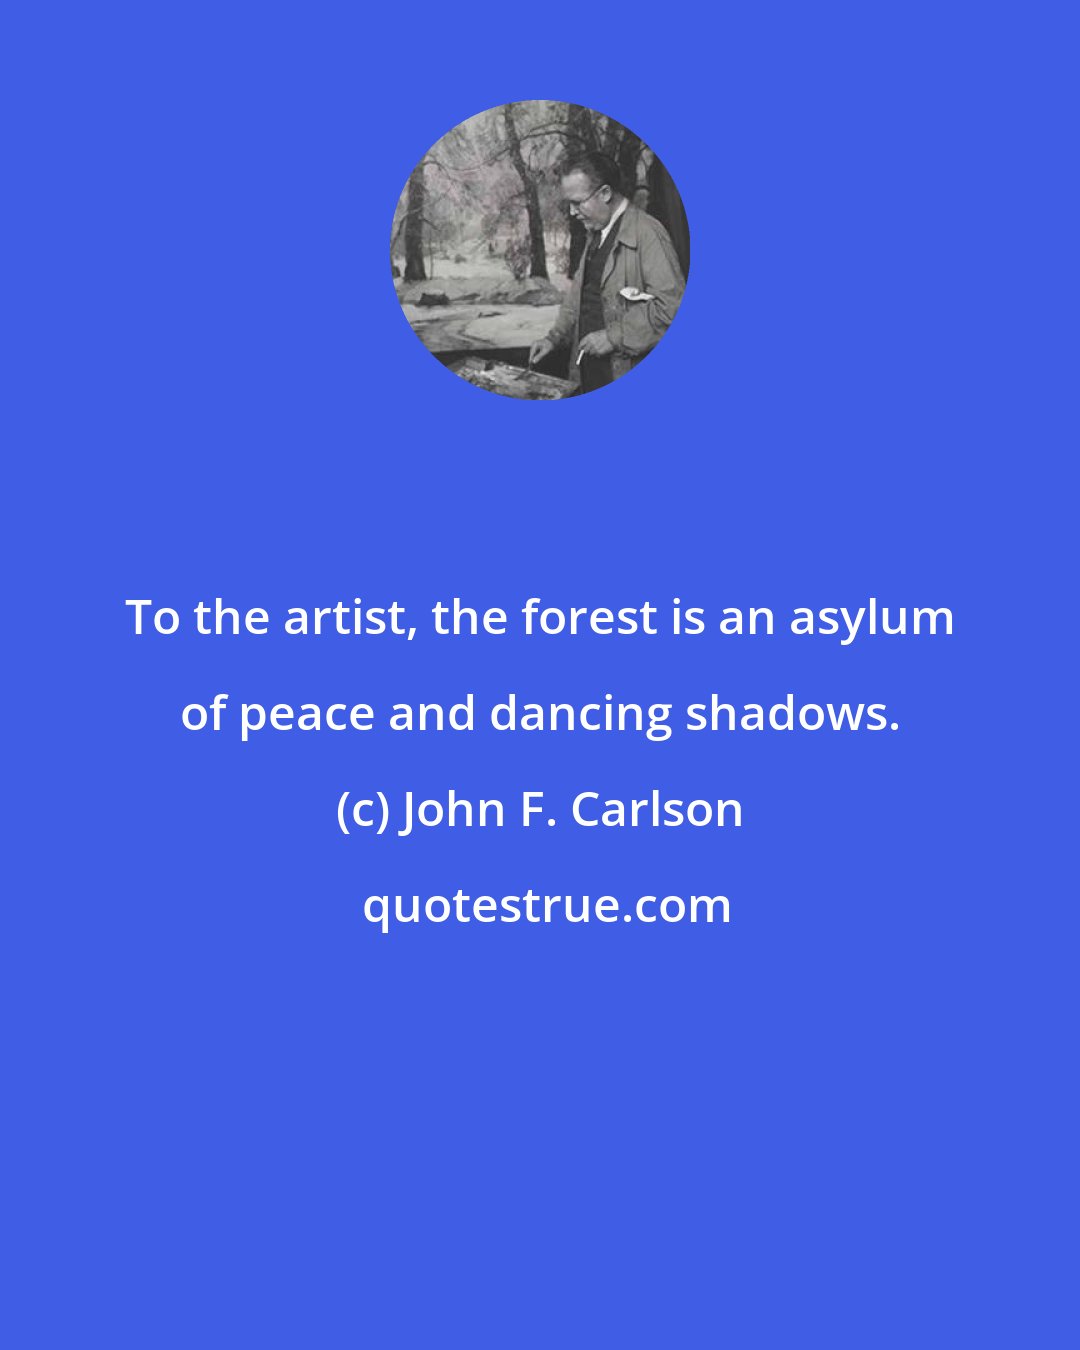 John F. Carlson: To the artist, the forest is an asylum of peace and dancing shadows.